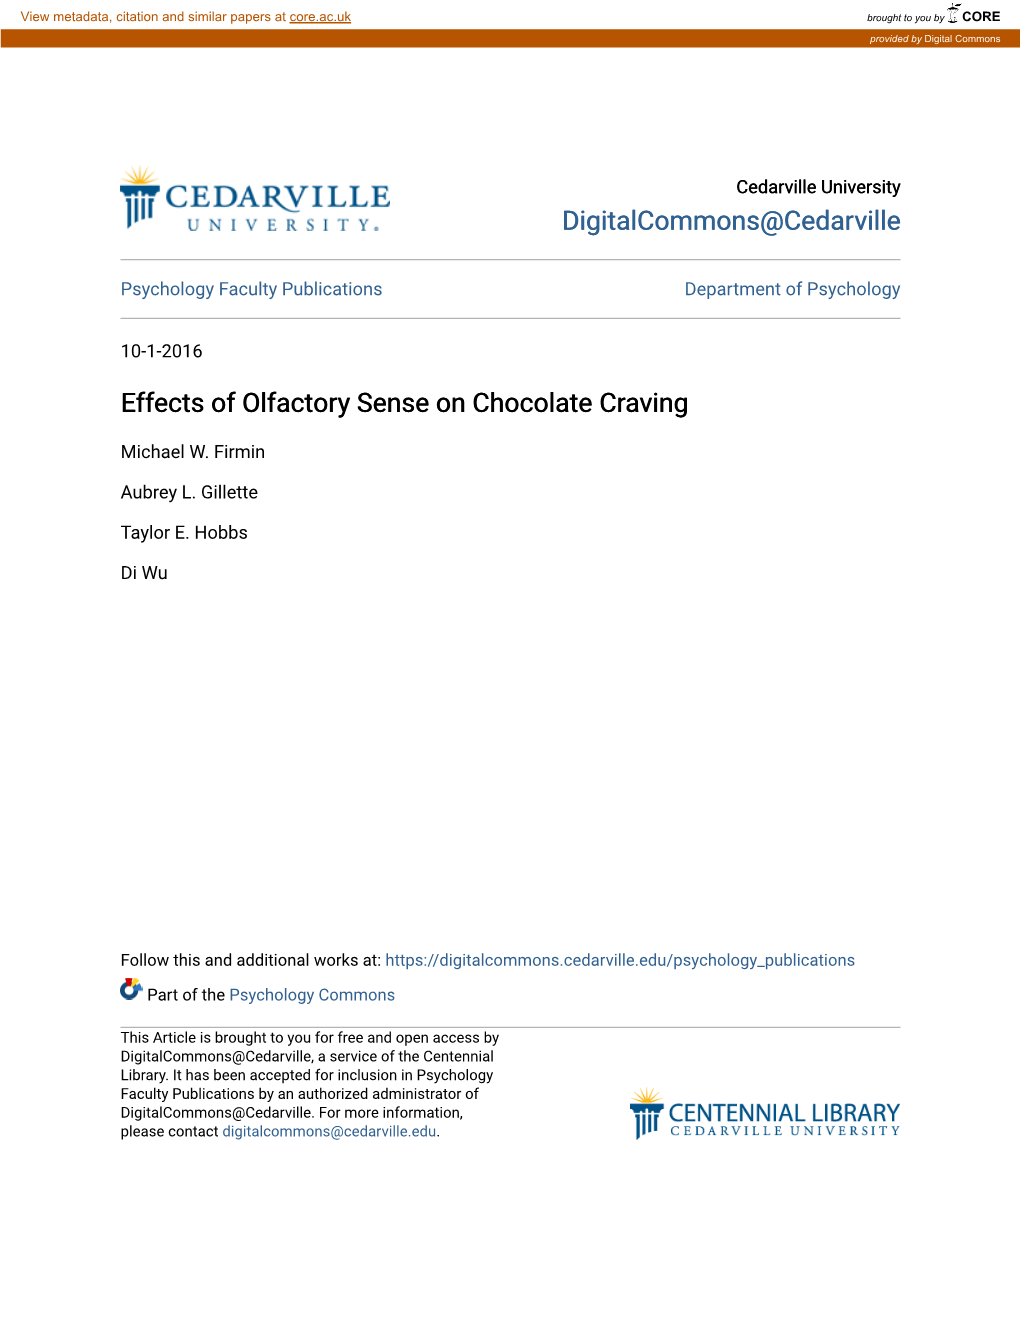 Effects of Olfactory Sense on Chocolate Craving